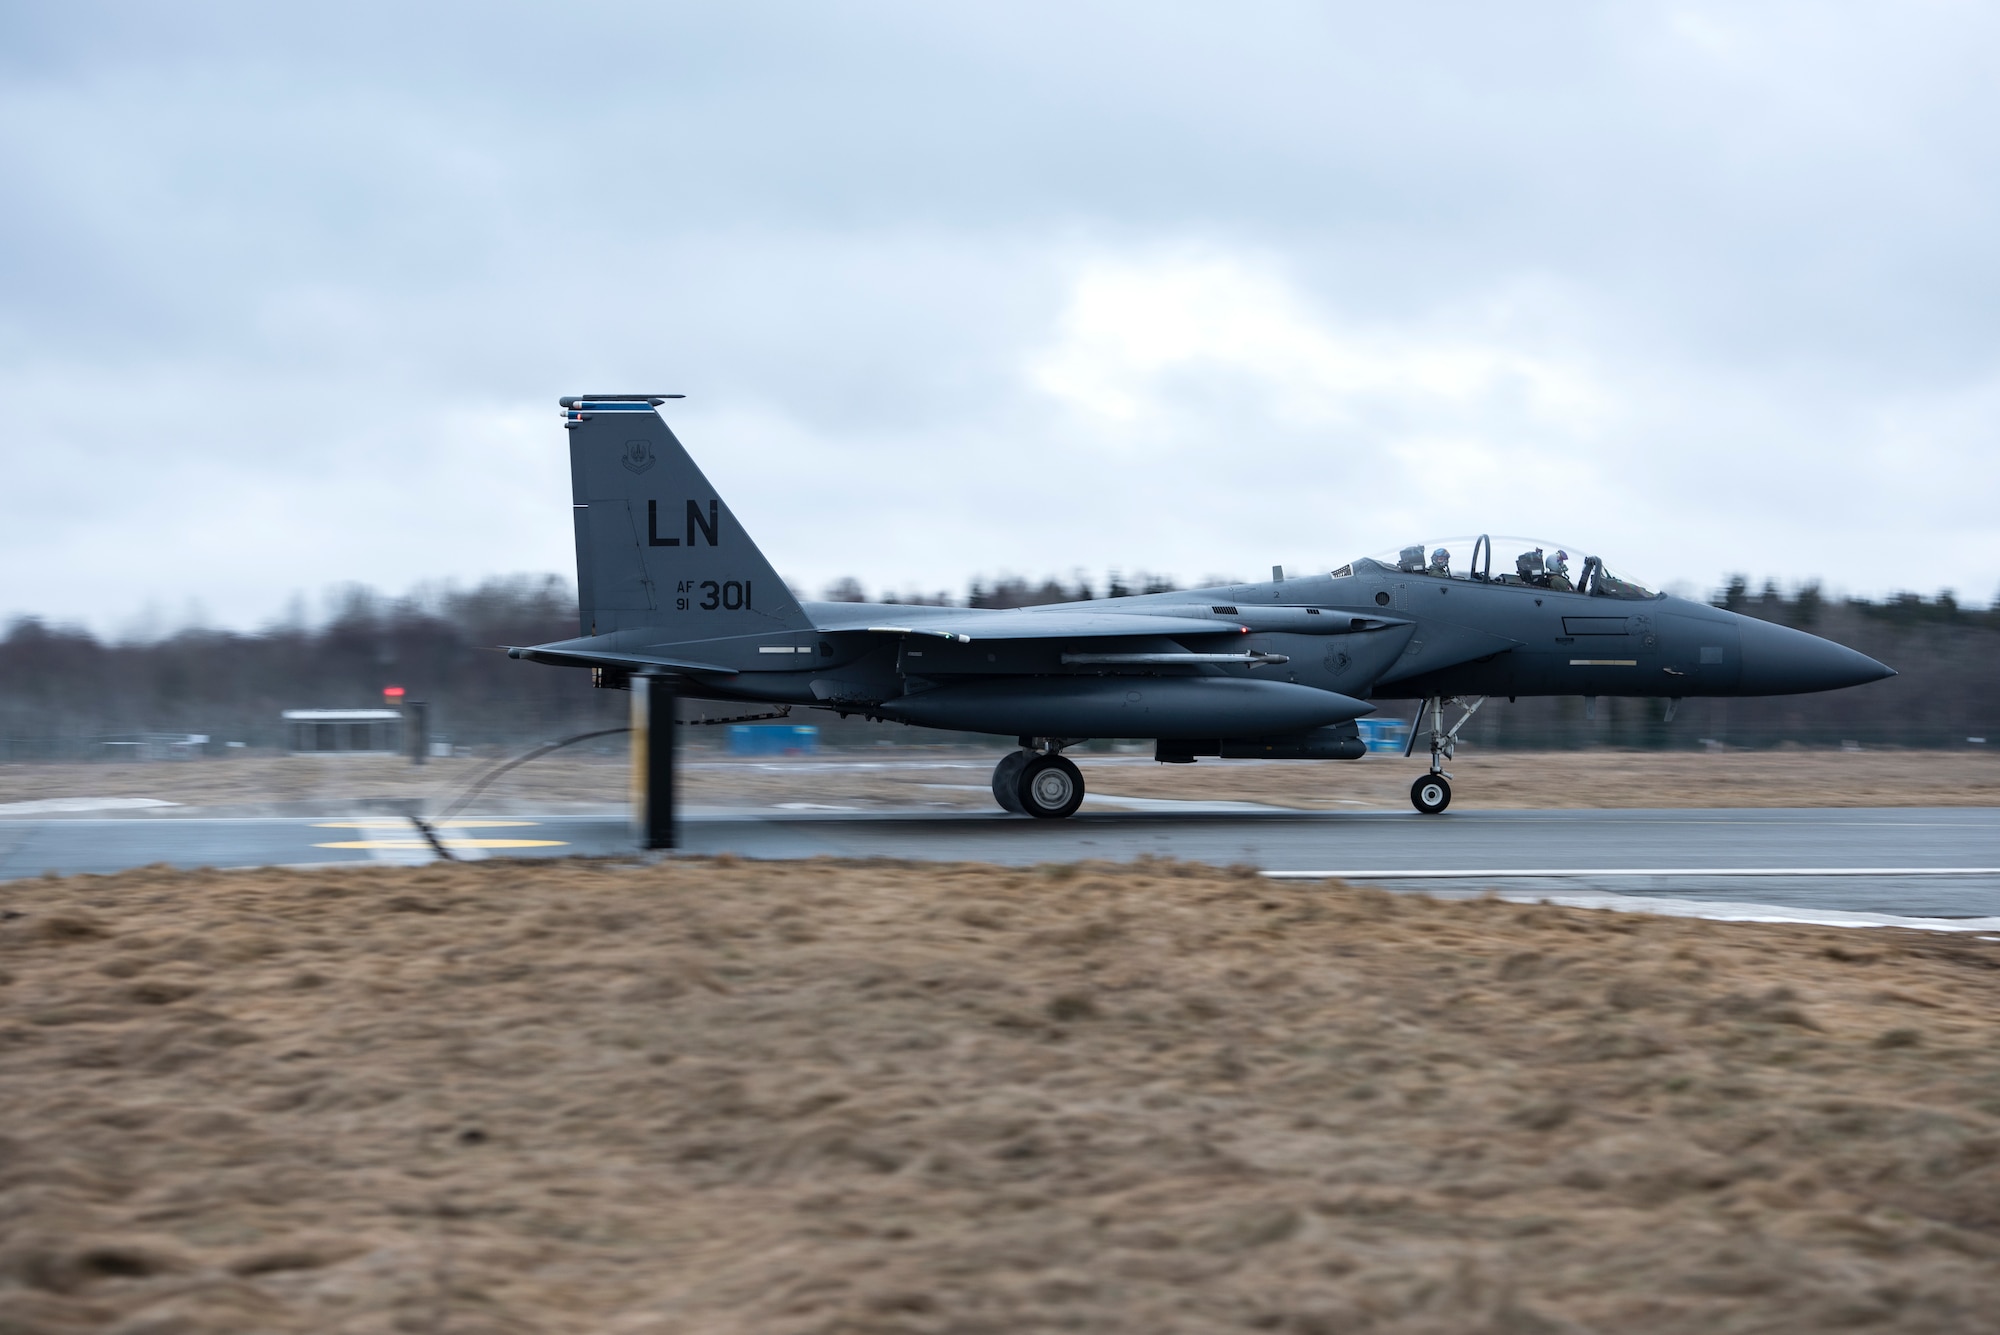 An F-15E Strike Eagle assigned to the 492nd Fighter Squadron catches the cable of an aircraft arresting system during a Barrier Arresting Kit certification at Ämari Air Base, Estonia, March 17, 2021. The BAK is certified annually to test the stability and effectiveness of the system, which acts as a braking mechanism to stop the aircraft in the event of an emergency that would prevent the aircraft from performing a standard landing. (U.S. Air Force photo by Airman 1st Class Jessi Monte)